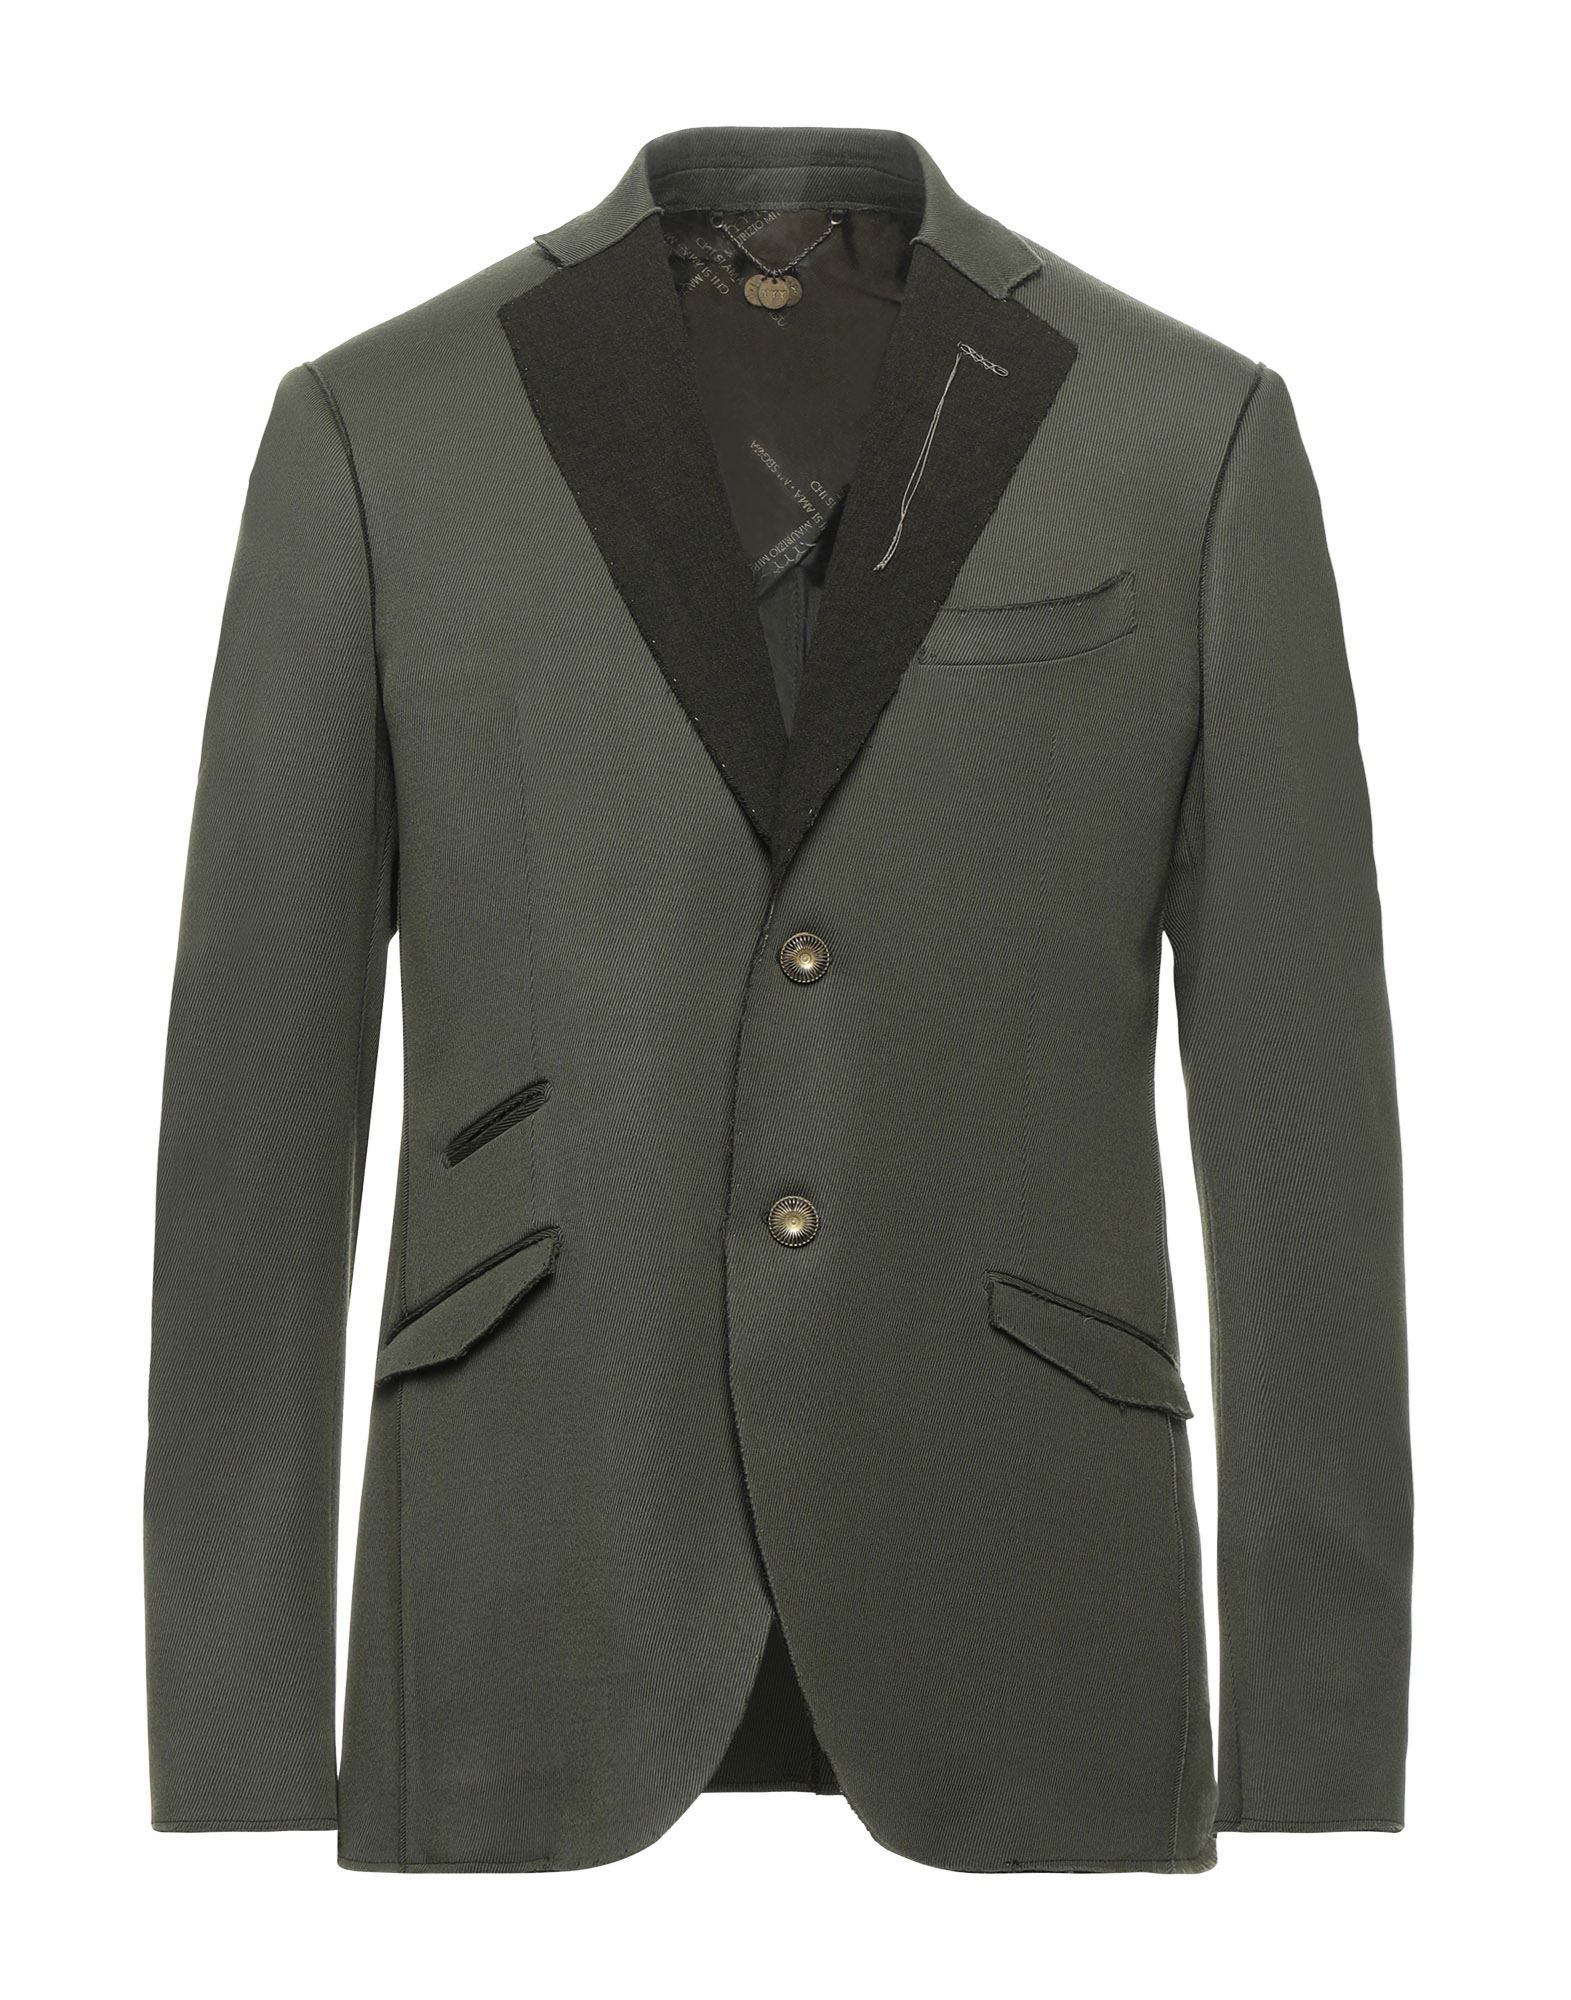 Maurizio Miri Suit Jackets In Military Green